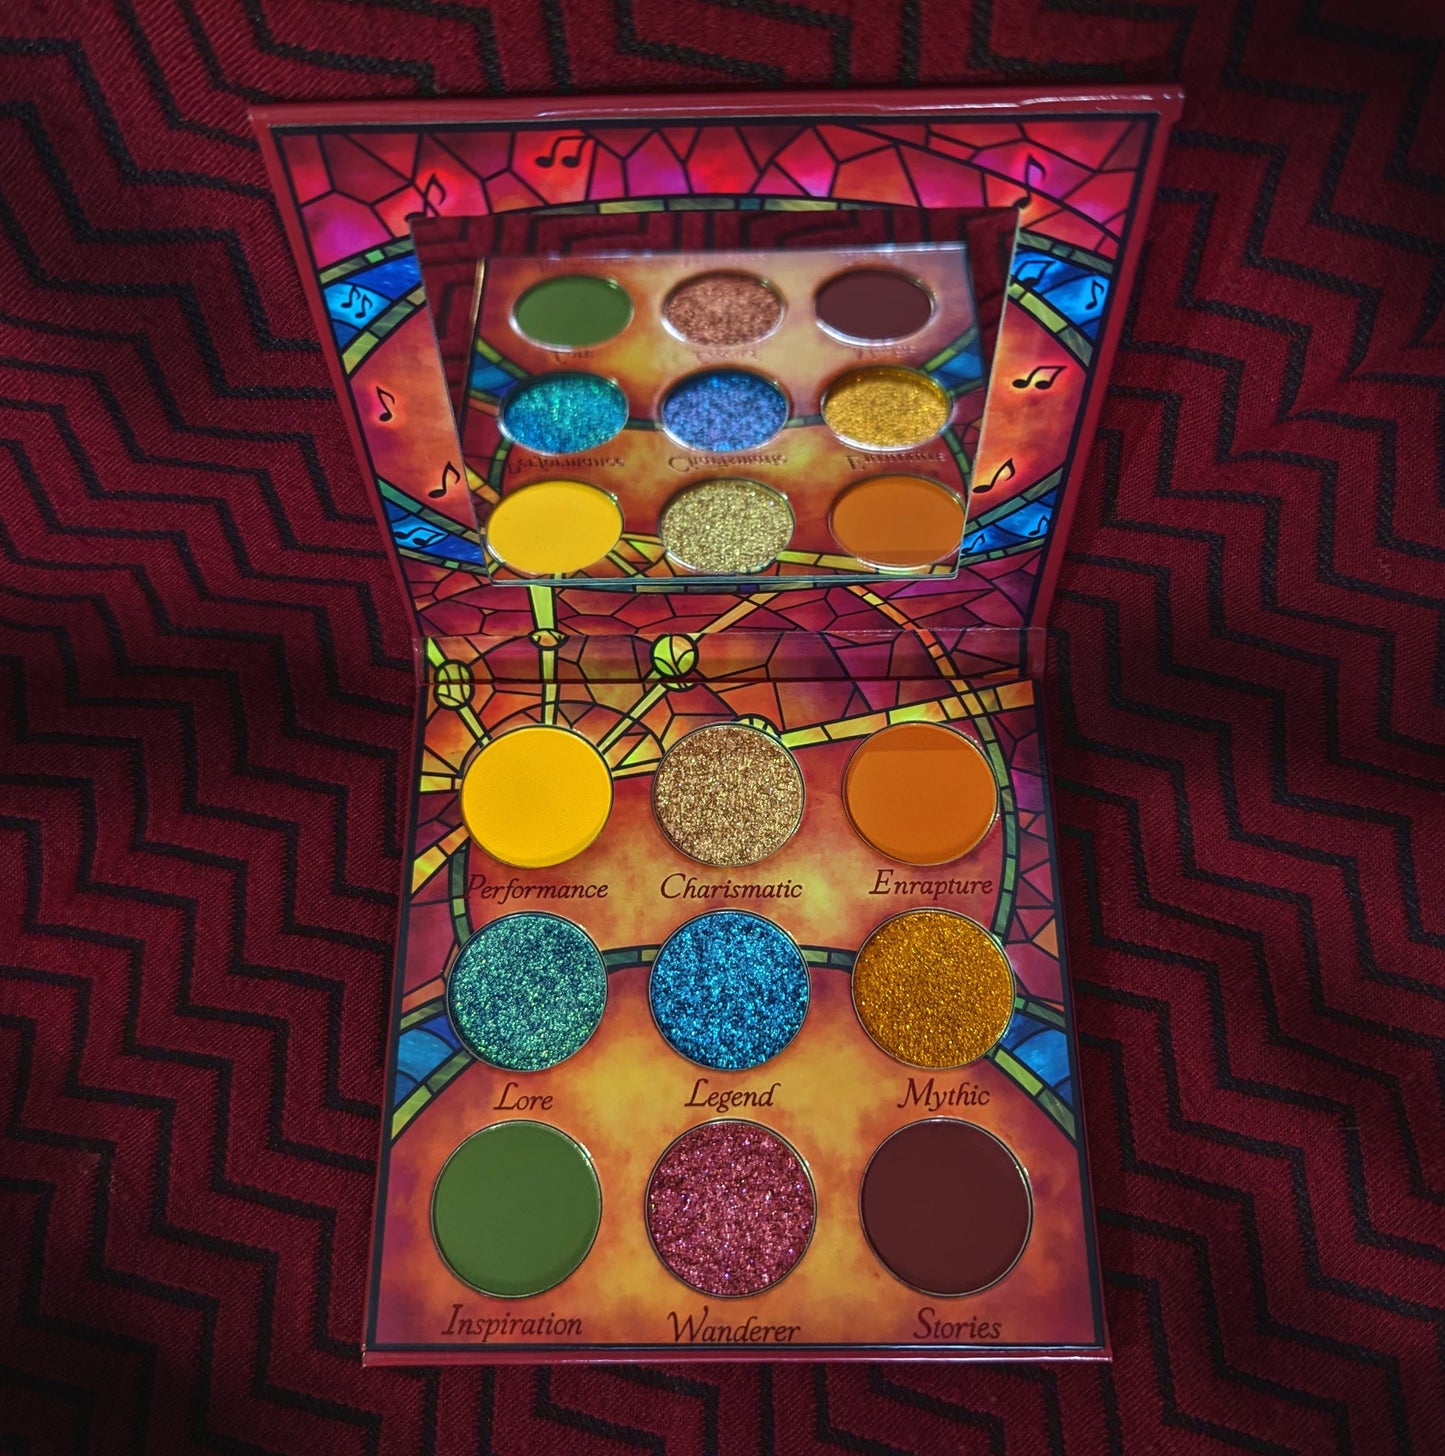 Bard eyeshadow palette by Fantasy cosmetics opened